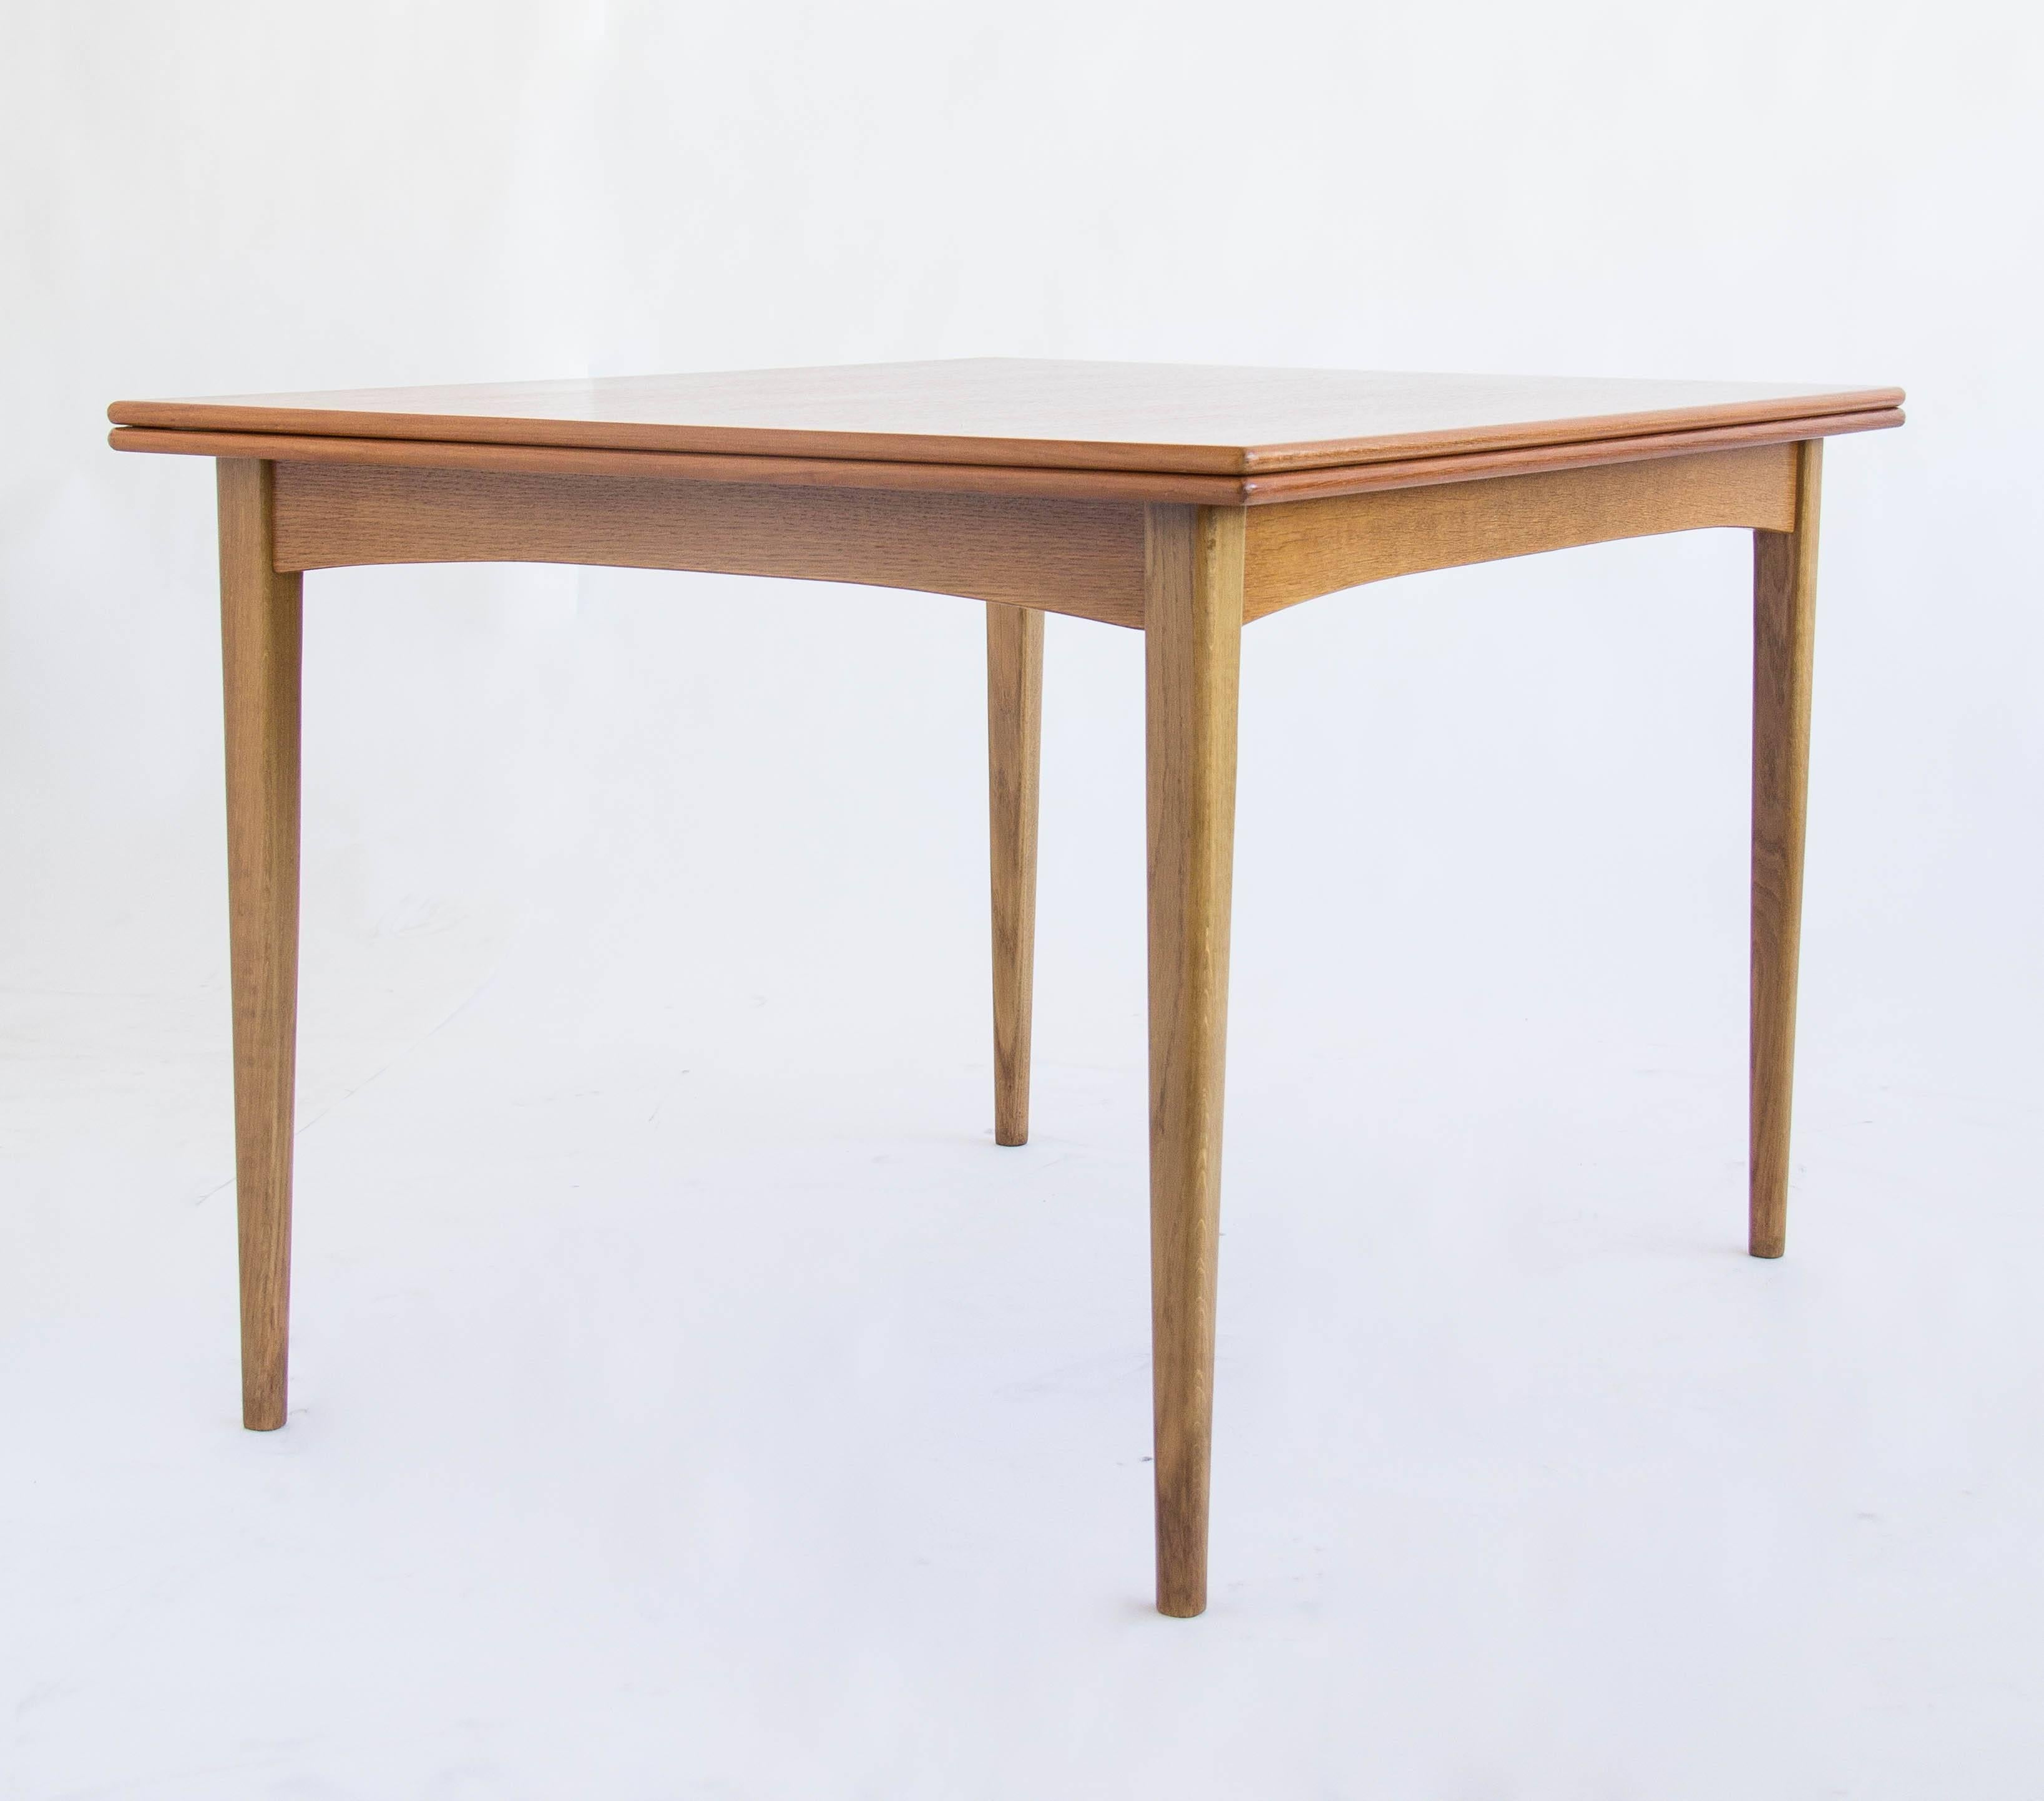 This is a incredible dining table designed by Folke Ohlsson for Dux of Sweden. The teak top has a swivel mechanism that allows it to rotate 90 degrees, and the top will then unfold.
The table completely transforms as the original length becomes the